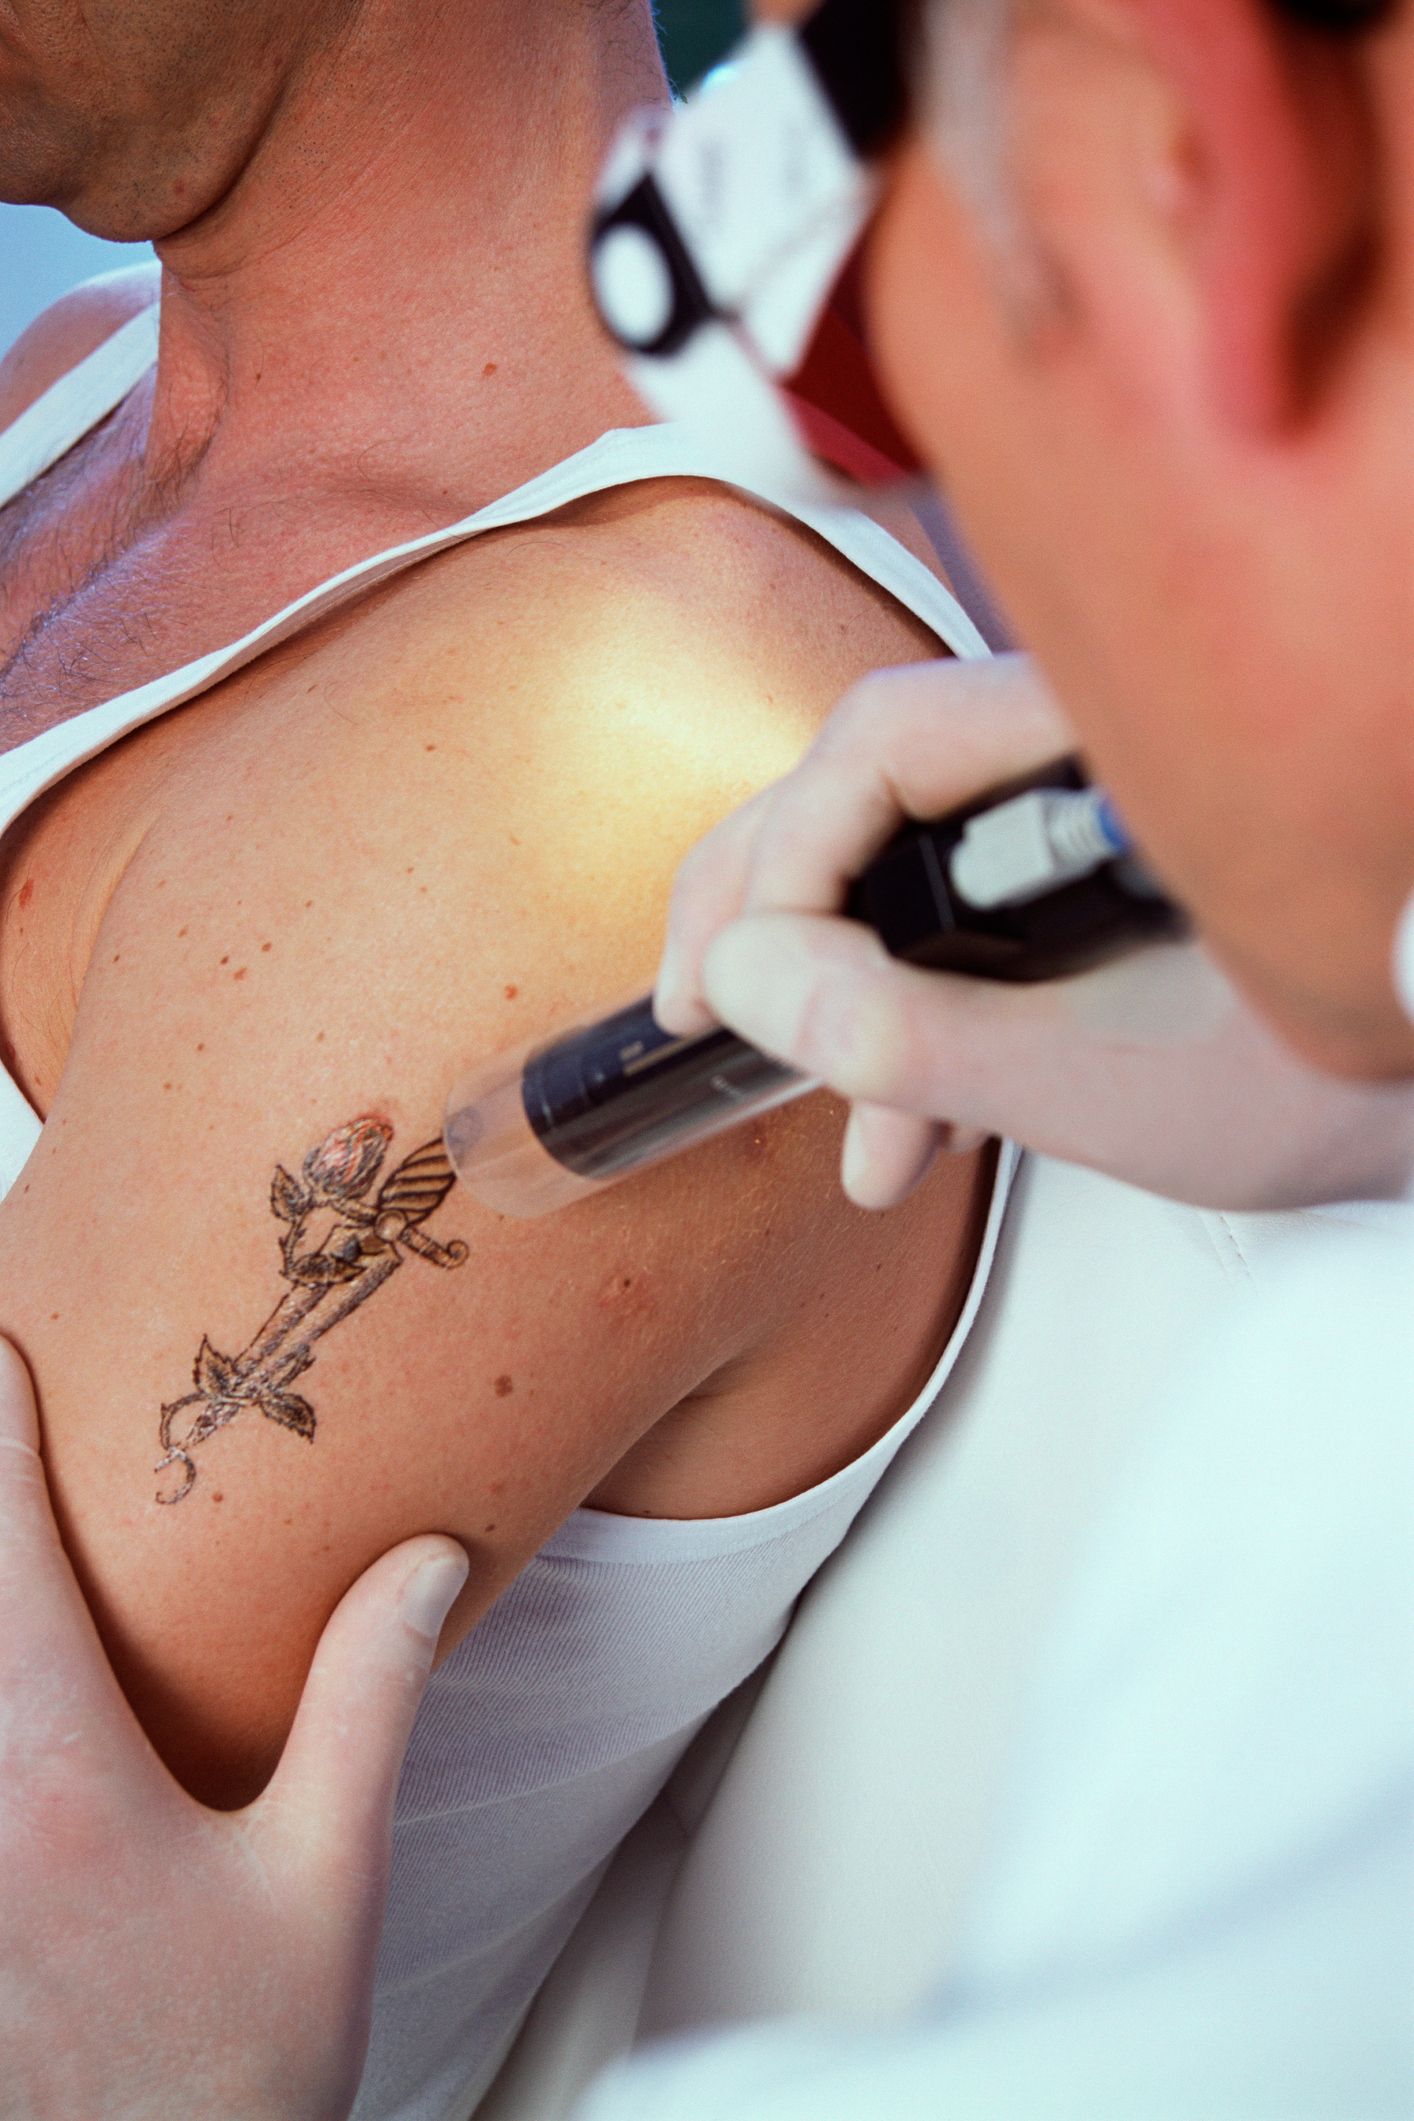 Infected Tattoos: 5 Things to Look For After Getting Inked